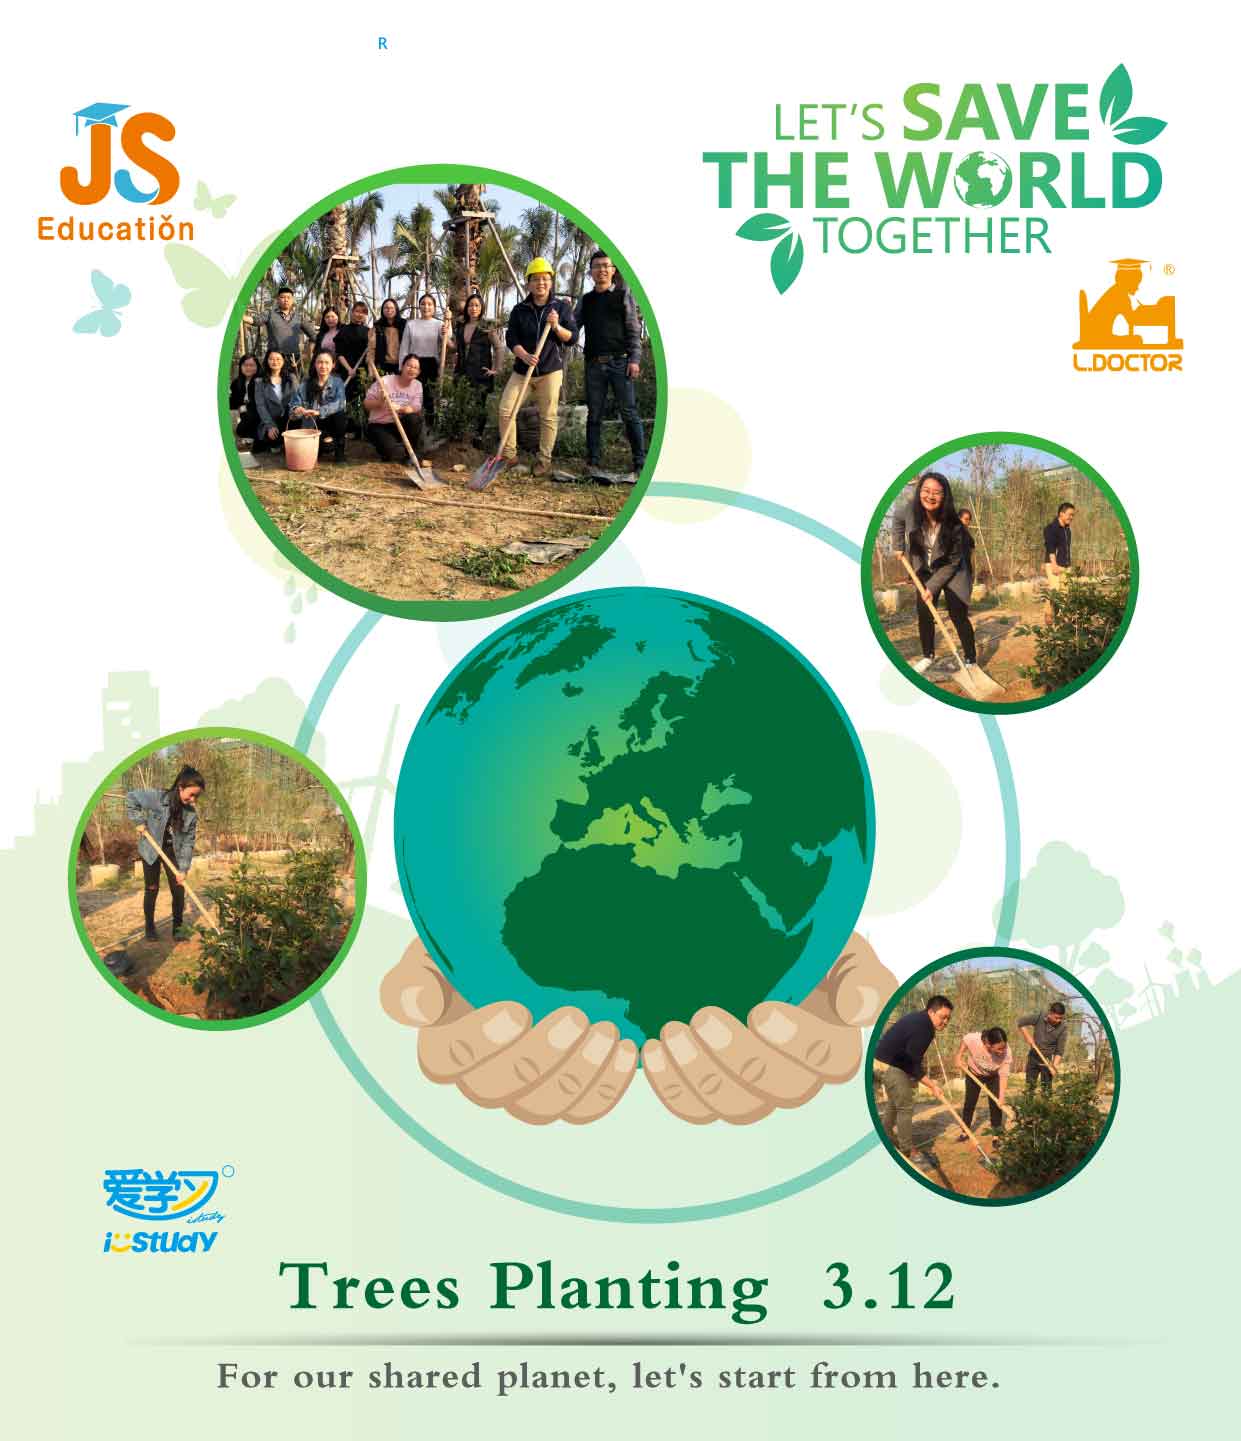 Arbor Day - What Are The Benefits Of Planting Trees?